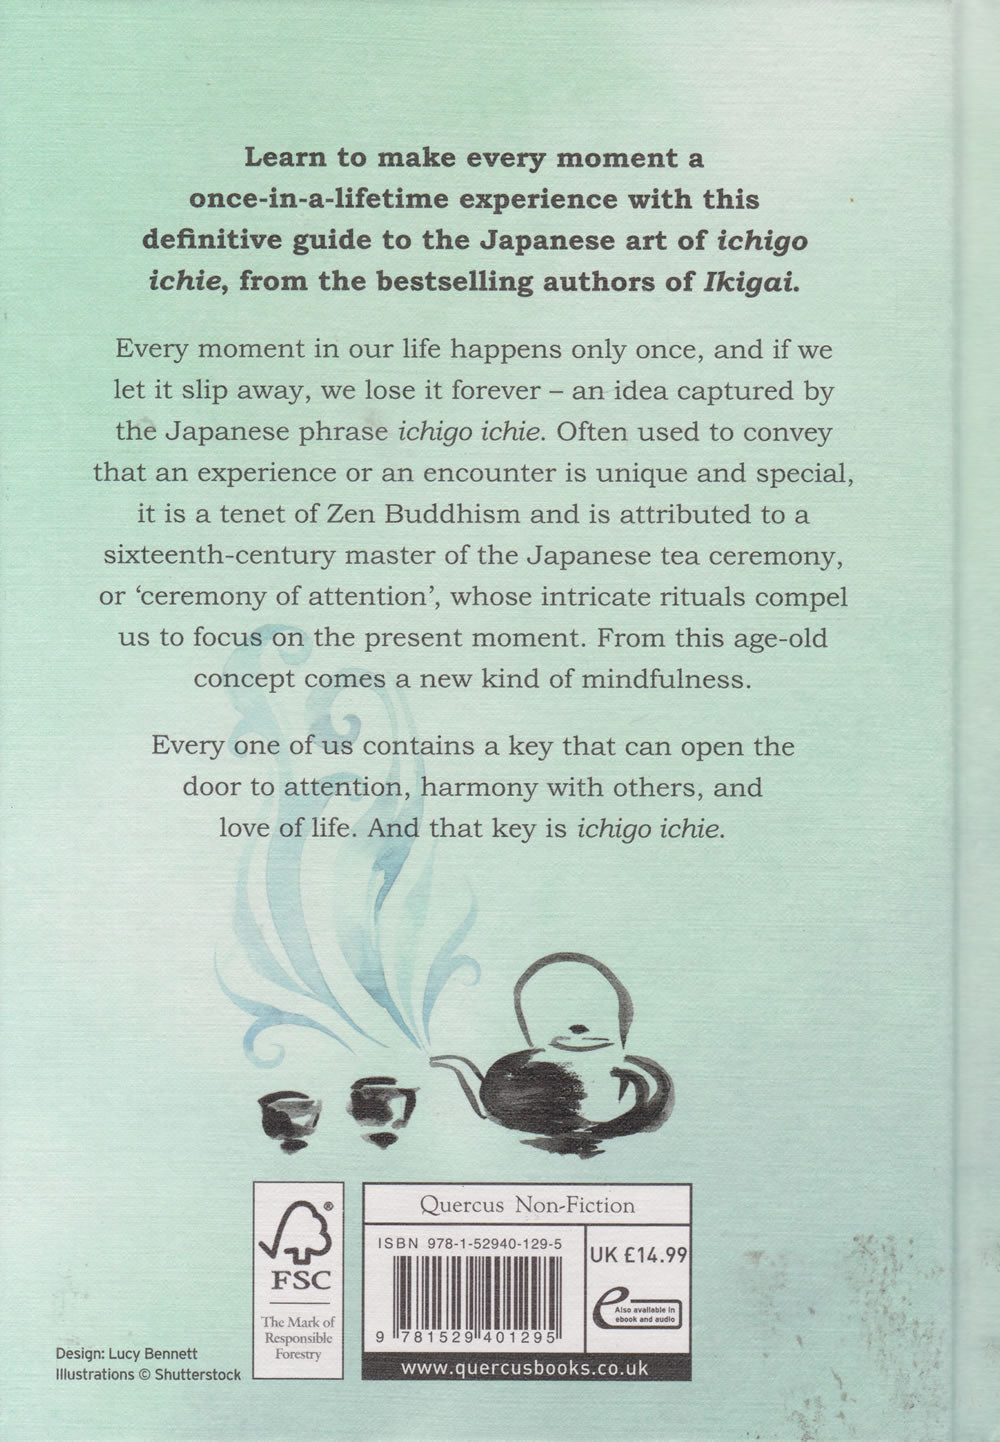 The Book Of Ichigo Ichie: The Art Of Making The Most of Every Moment, the Japanese Way